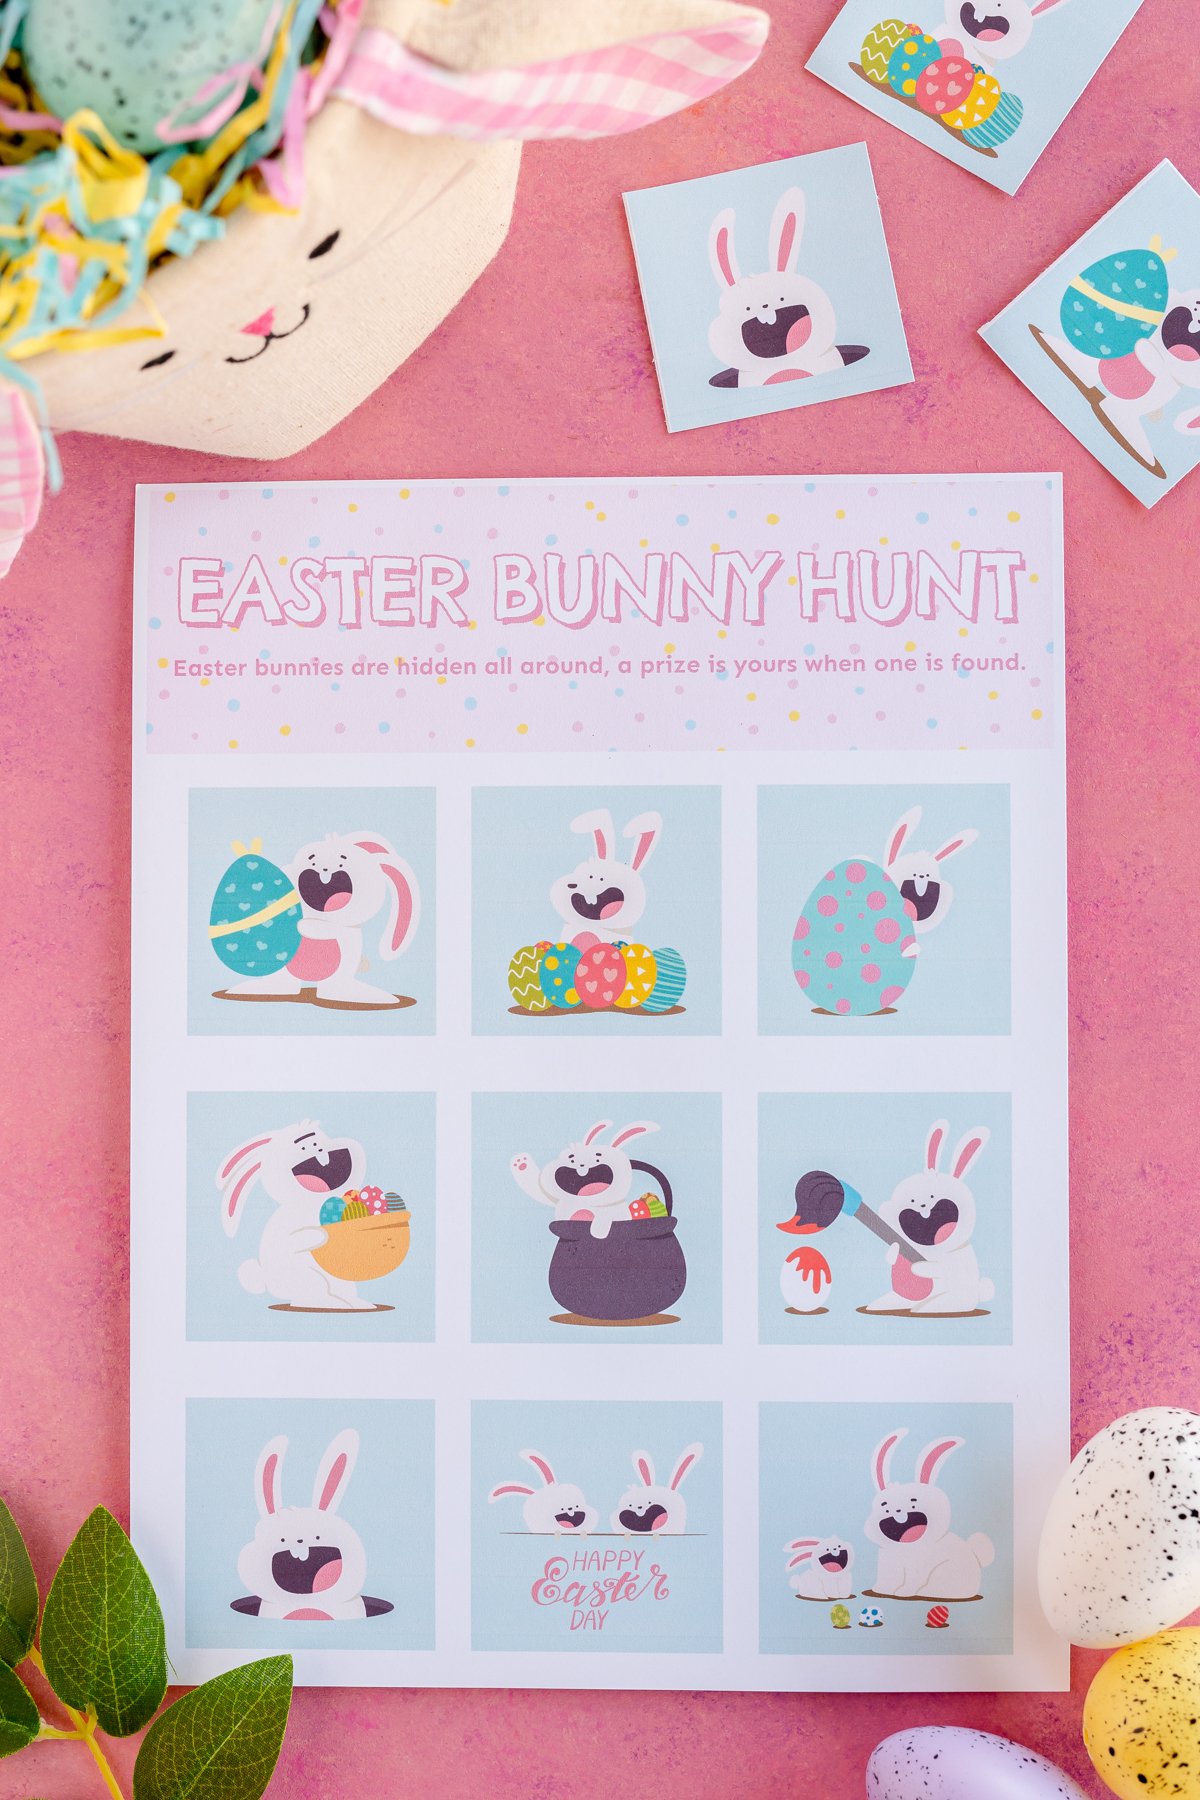 Printed out Easter bunny hunt cards